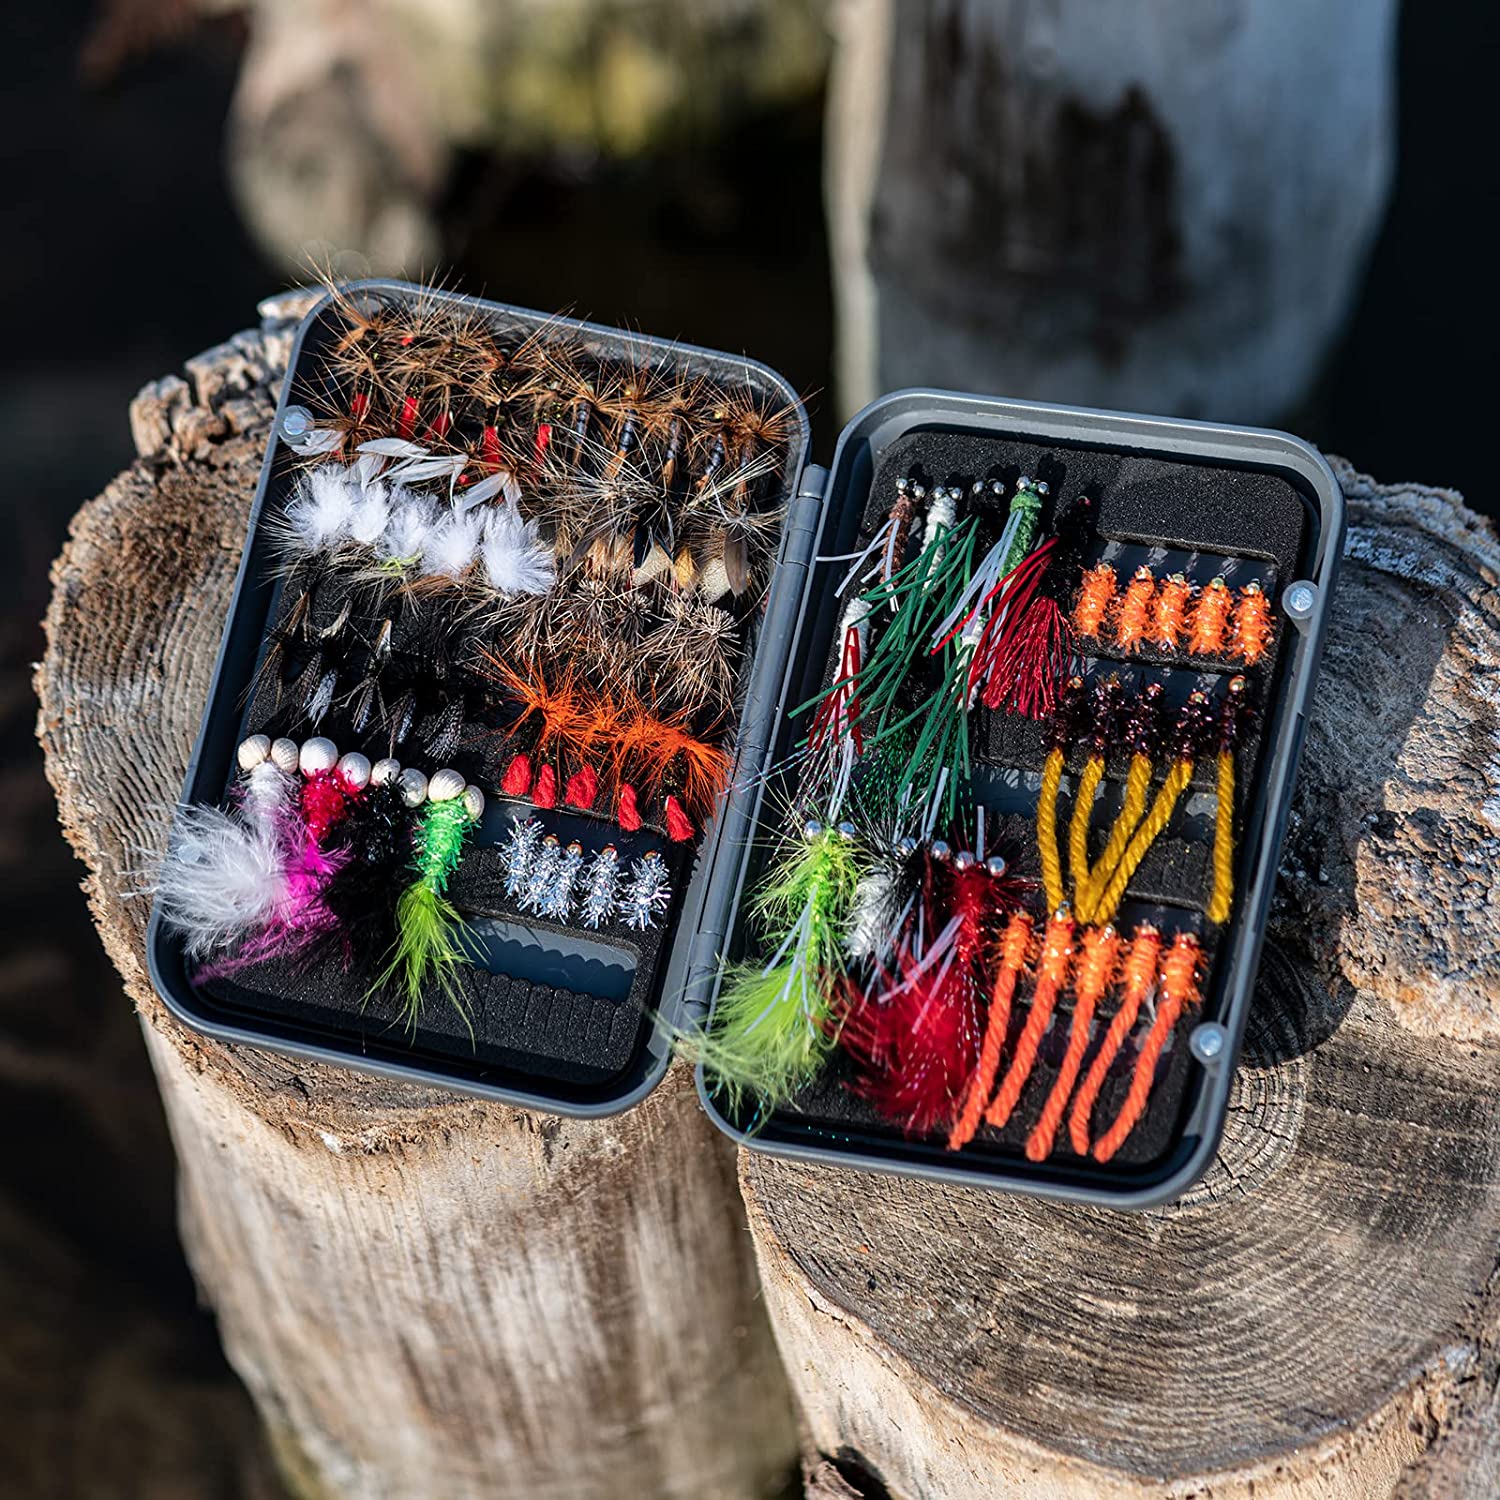 Goture Fly Fishing Flies Lures Kit with Fly Box for Bass Trout